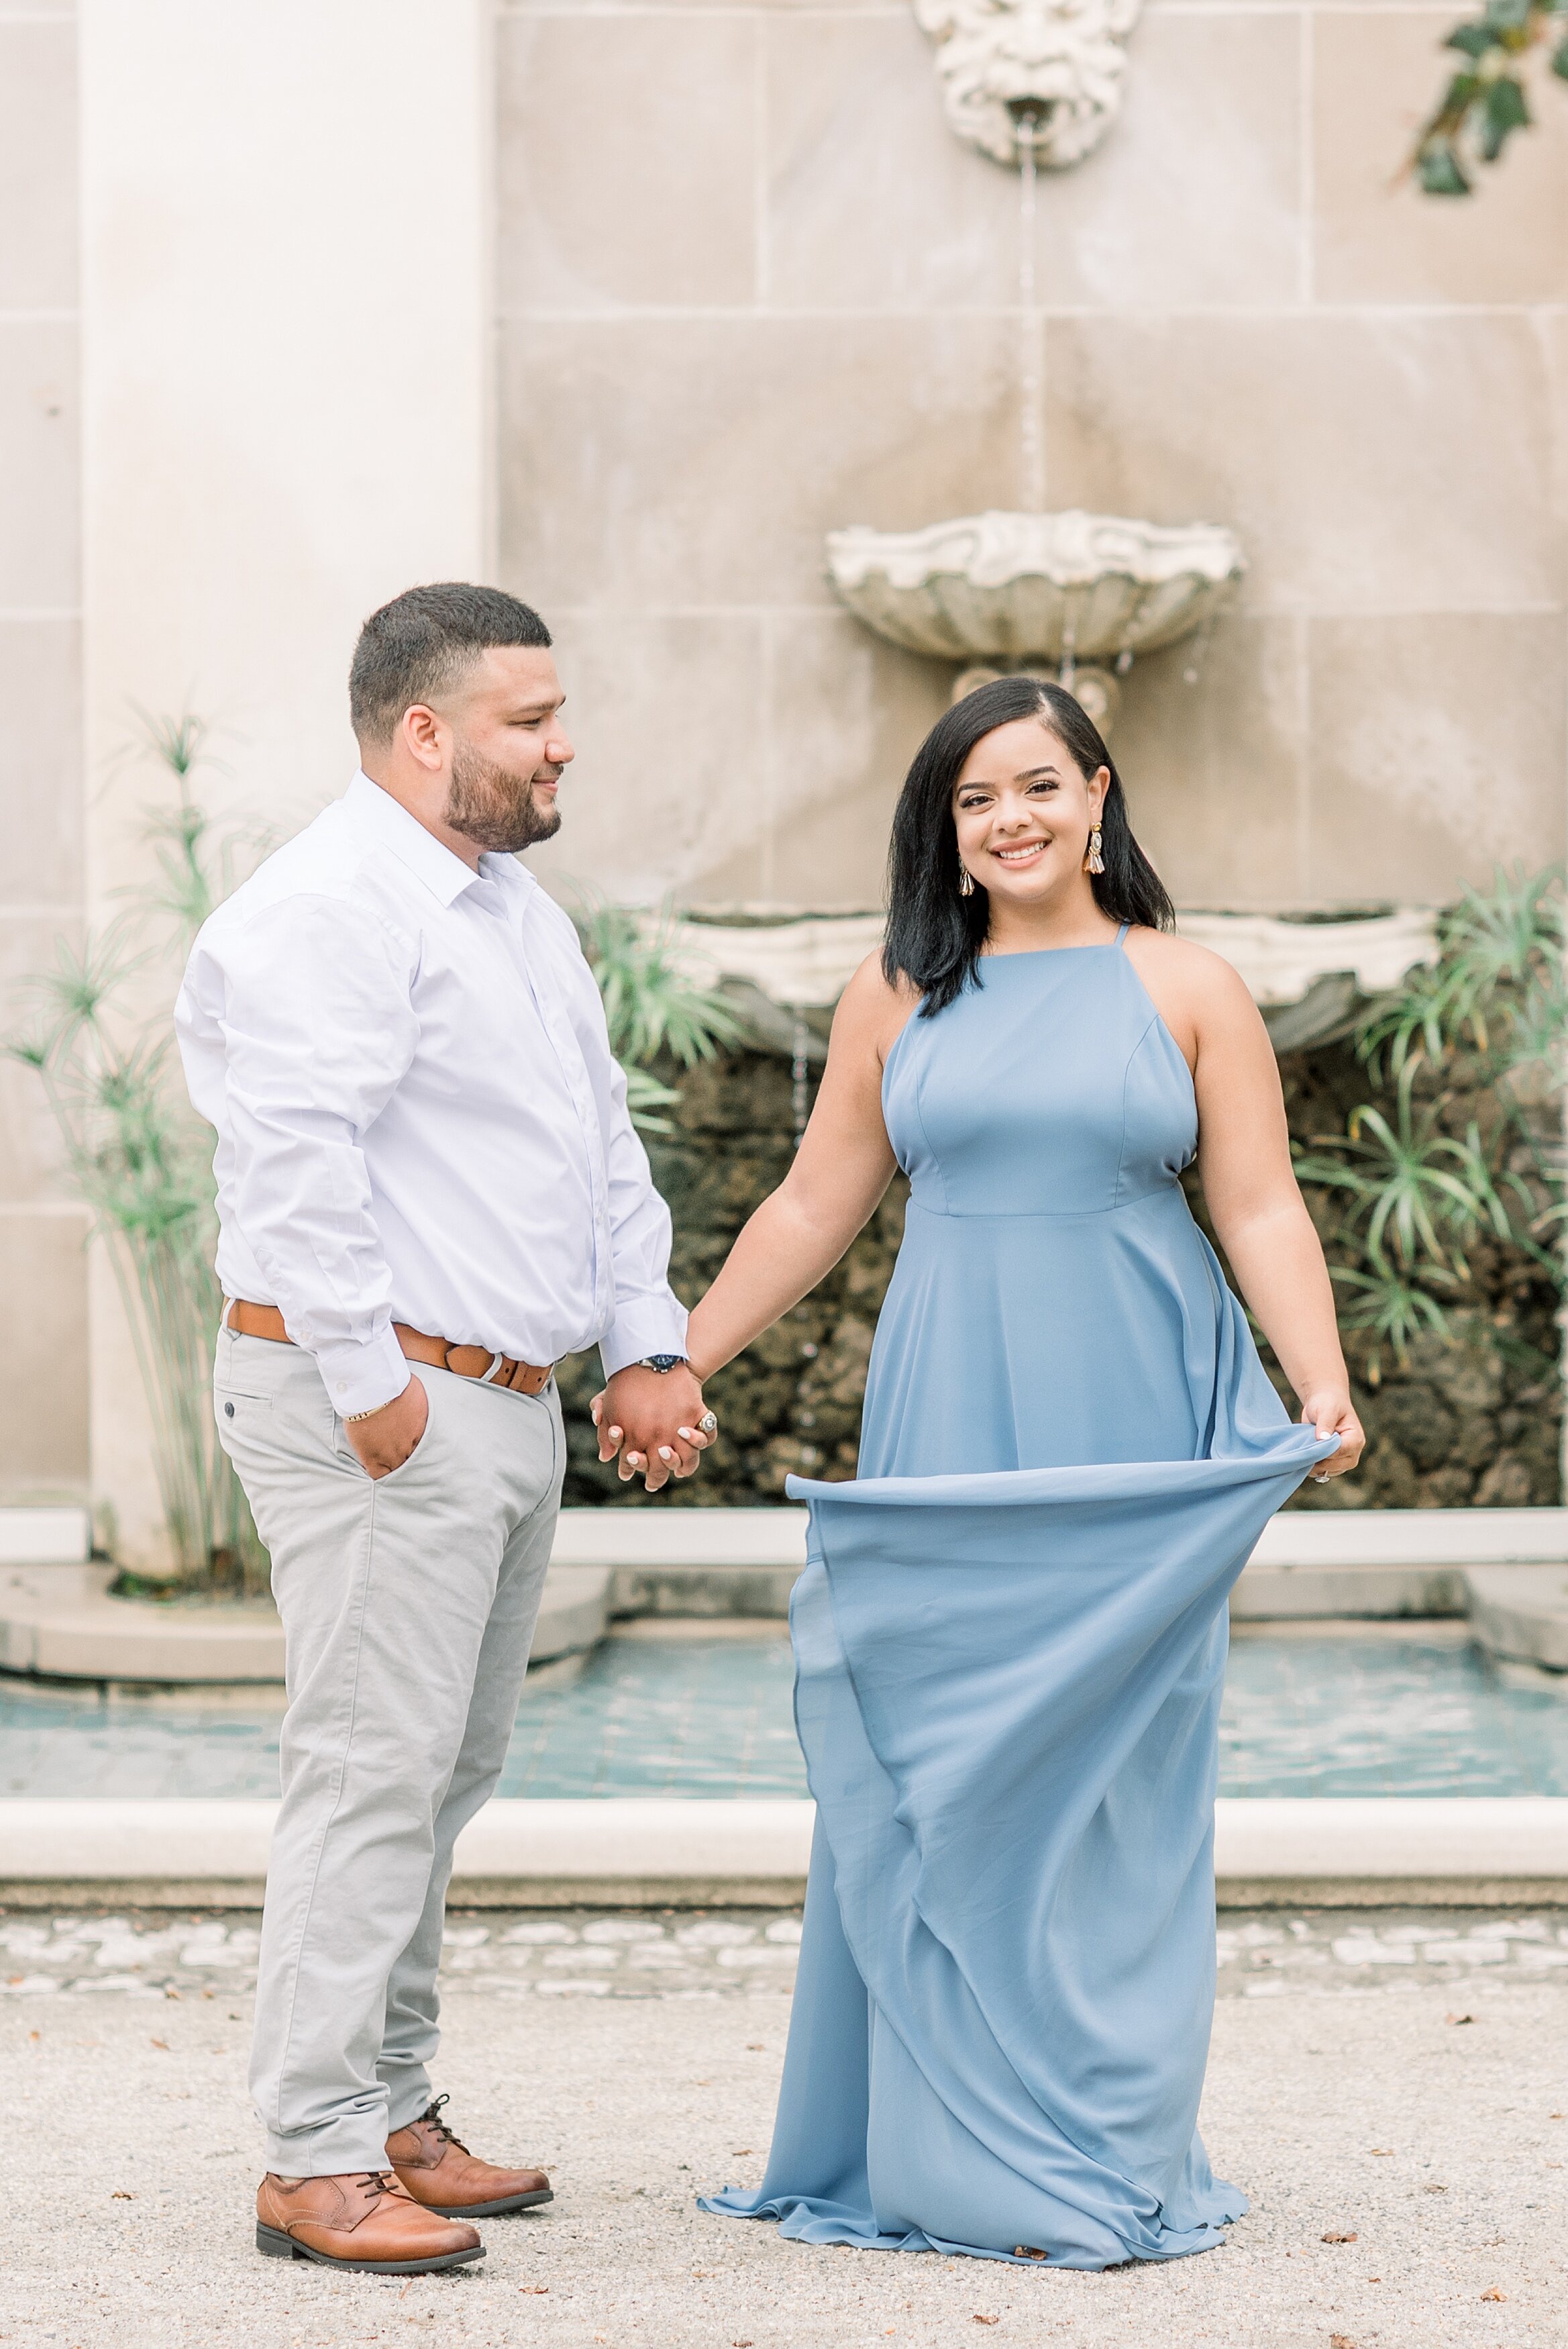 Longwood Gardens Kennet Square Pa Summer Engagement Session Photography_7645.jpg